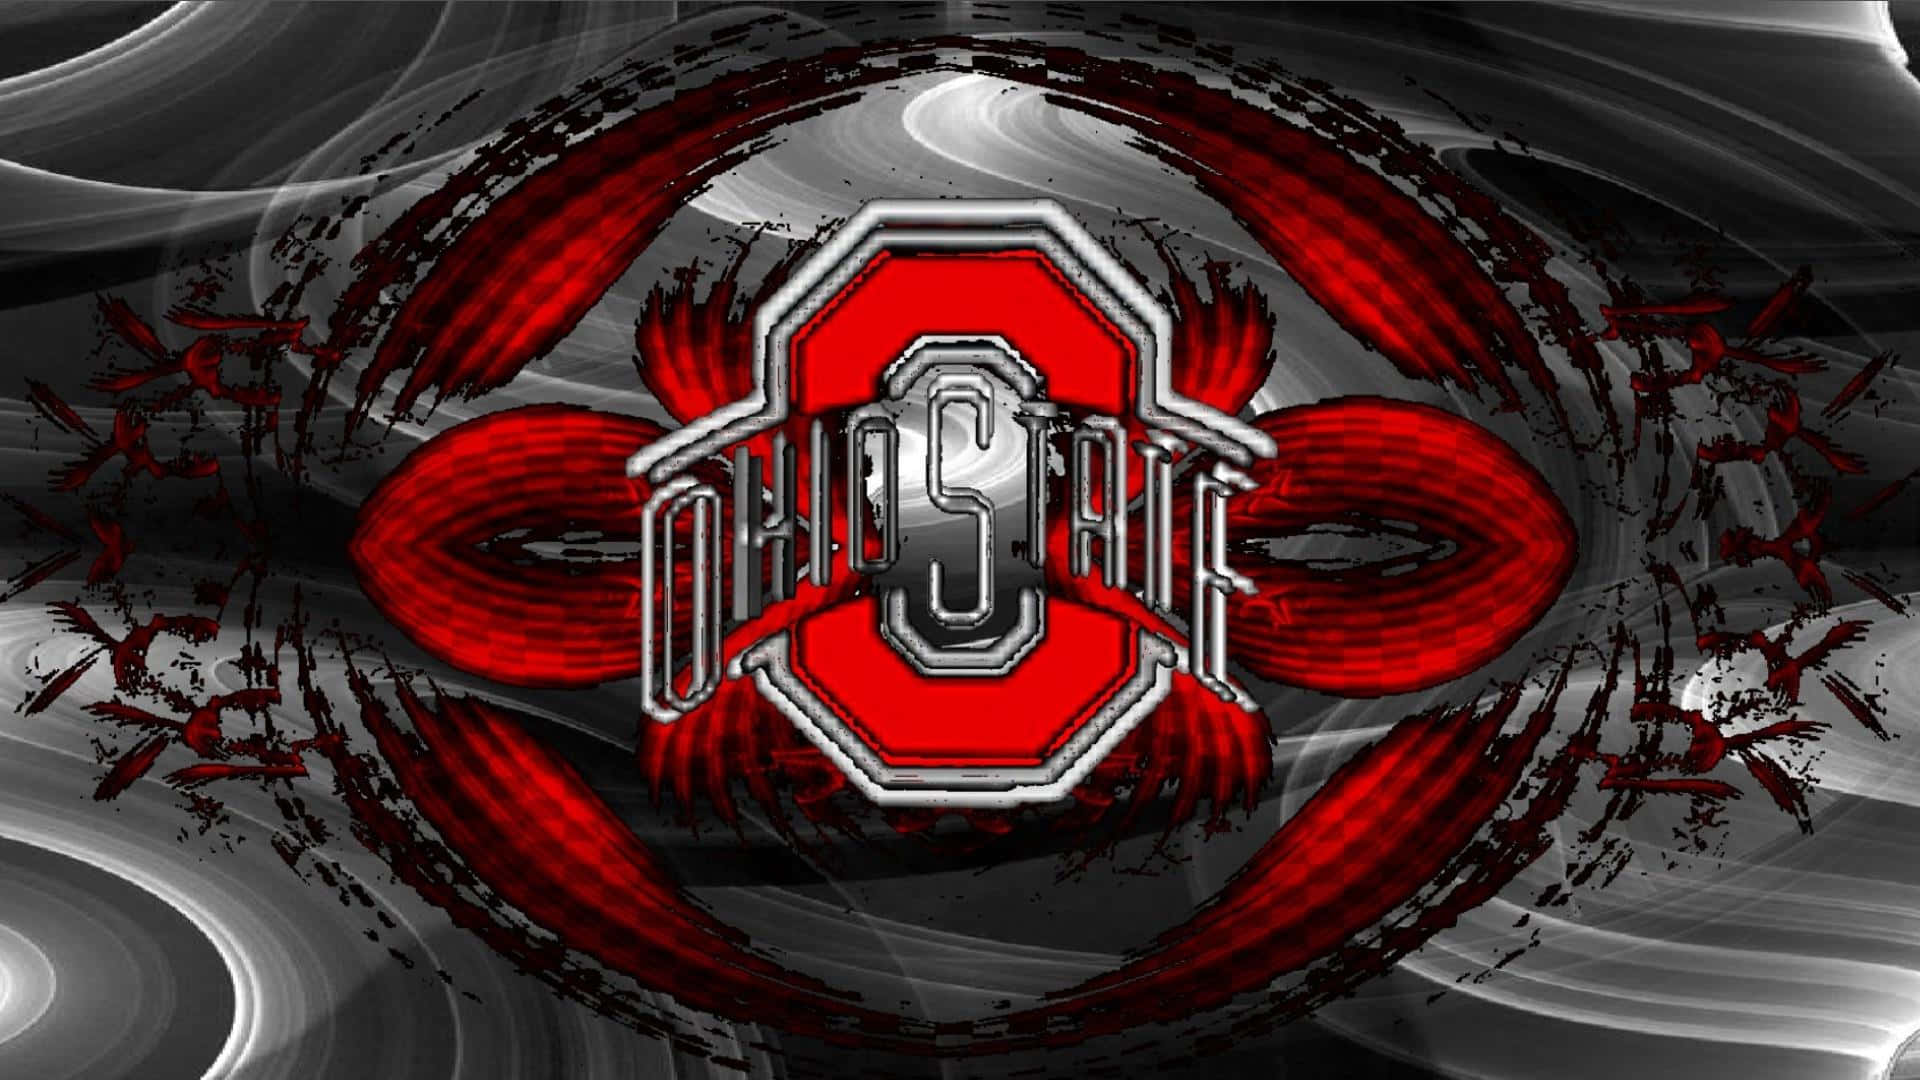 Ohio State Logo Red And Silver Abstract Design Wallpaper